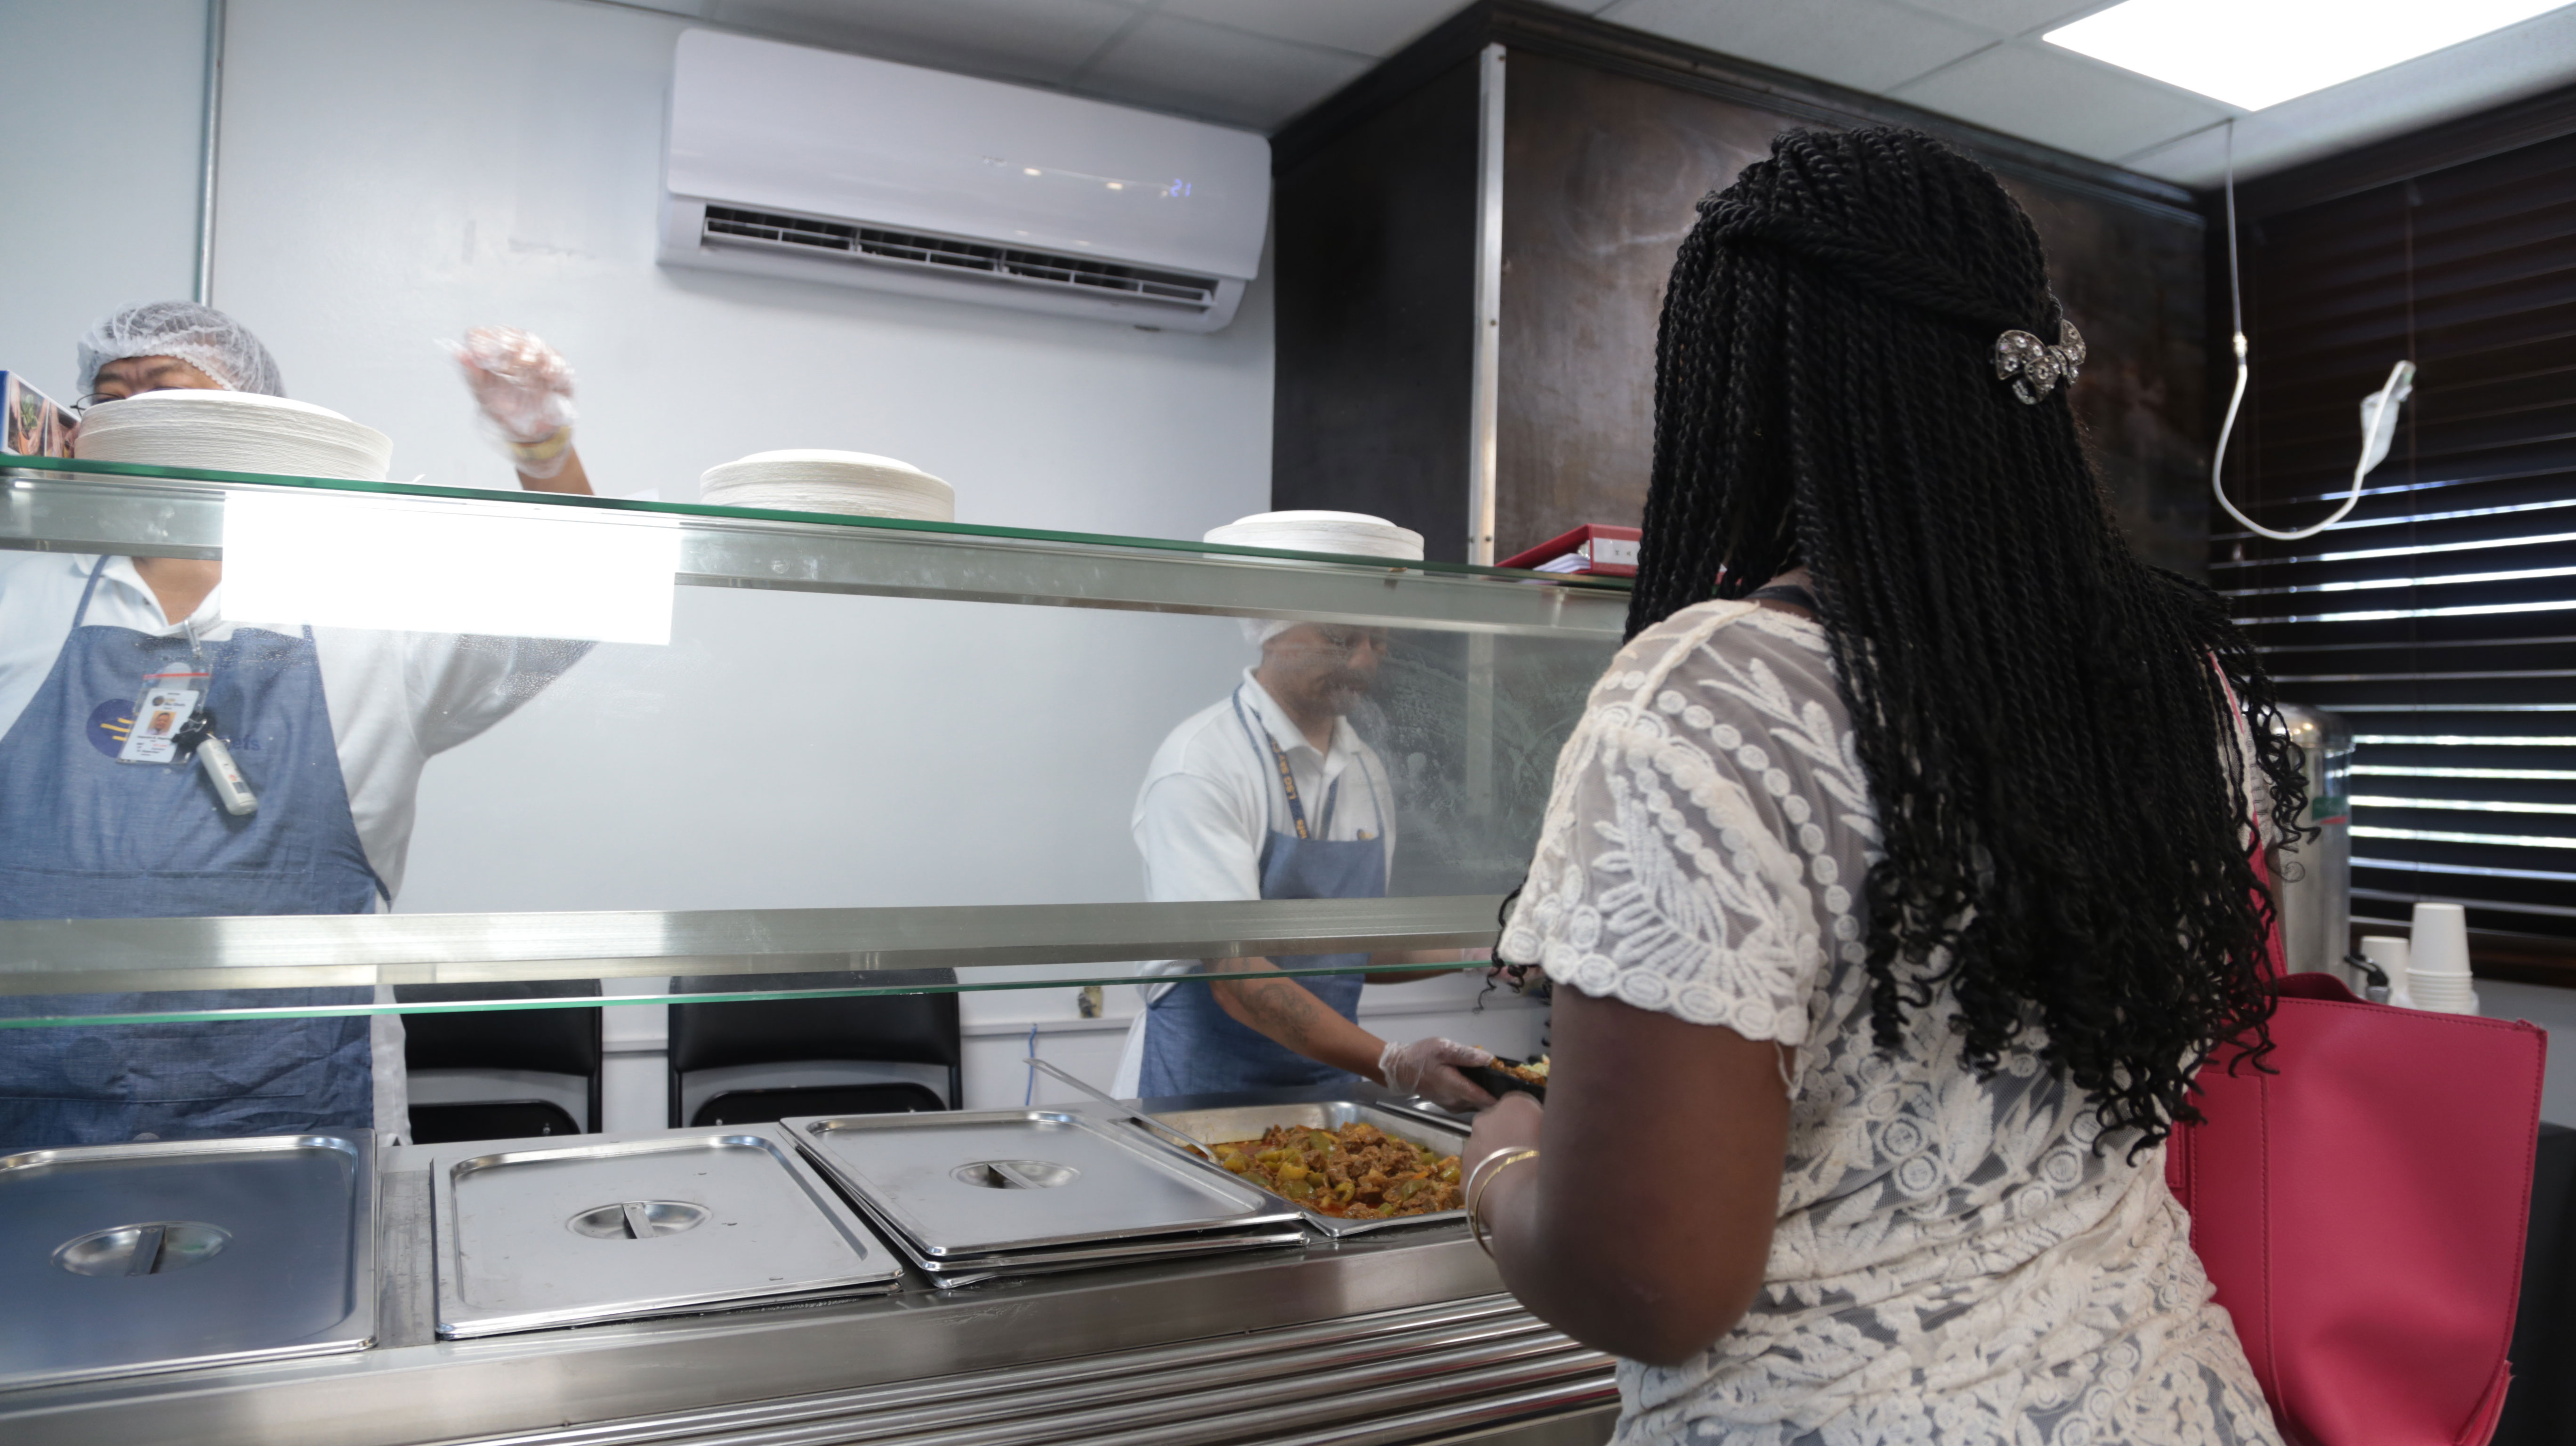 The University’s Information Technology department has developed an electronic meal card system to track students’ use of their meal plans at the dormitory dining facility and convenience store. 